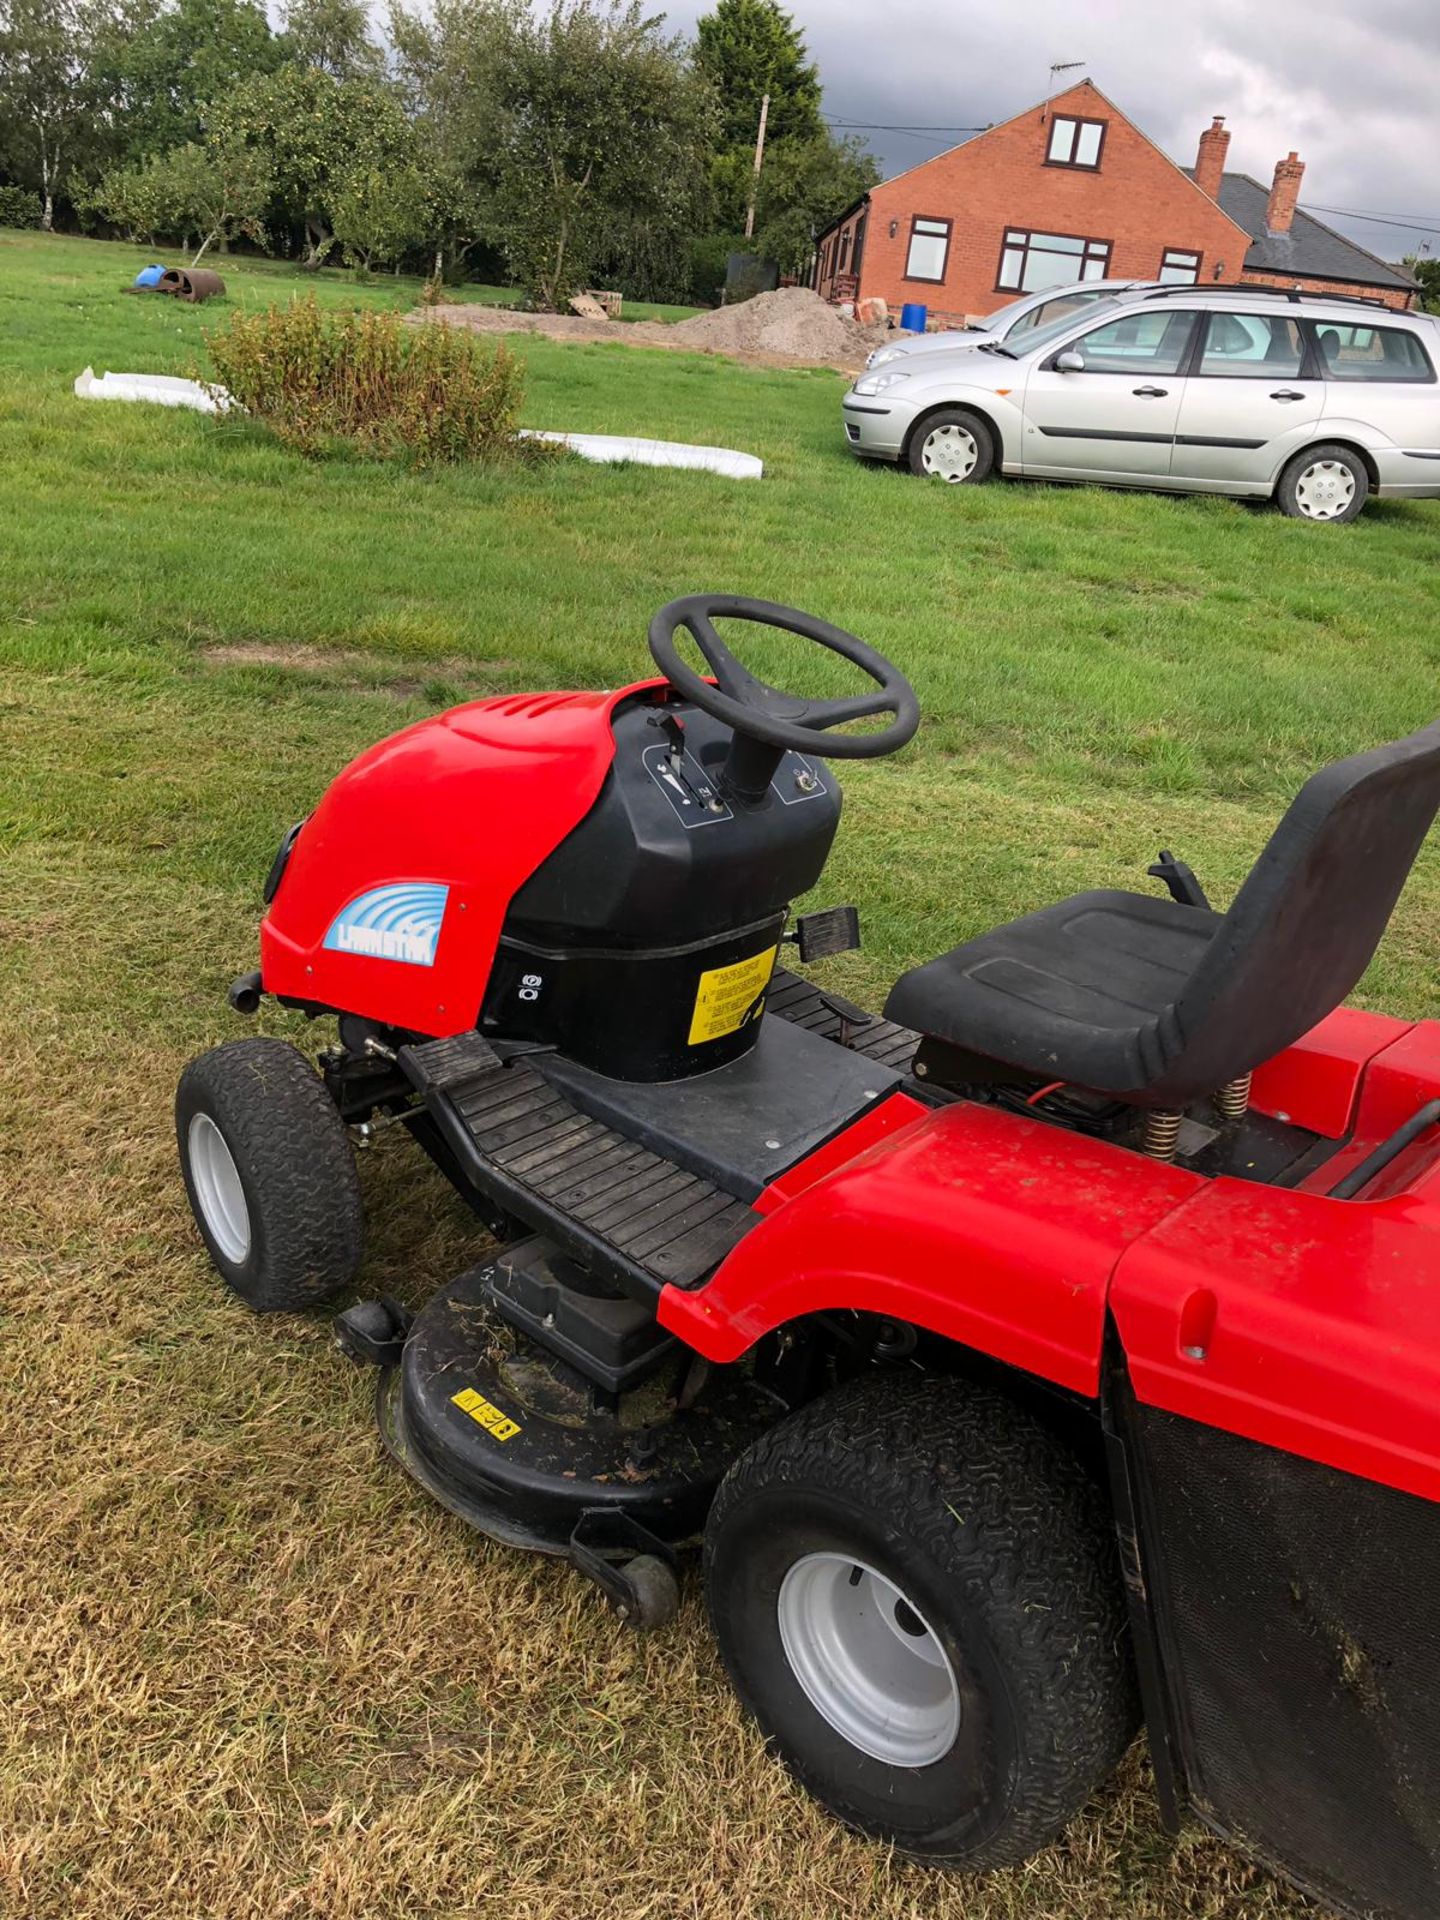 LAWNSTAR RIDE ON PETROL LAWN MOWER WITH REAR GRASS COLLECTOR, STARTS, RUNS AND CUTS *NO VAT* - Image 5 of 7